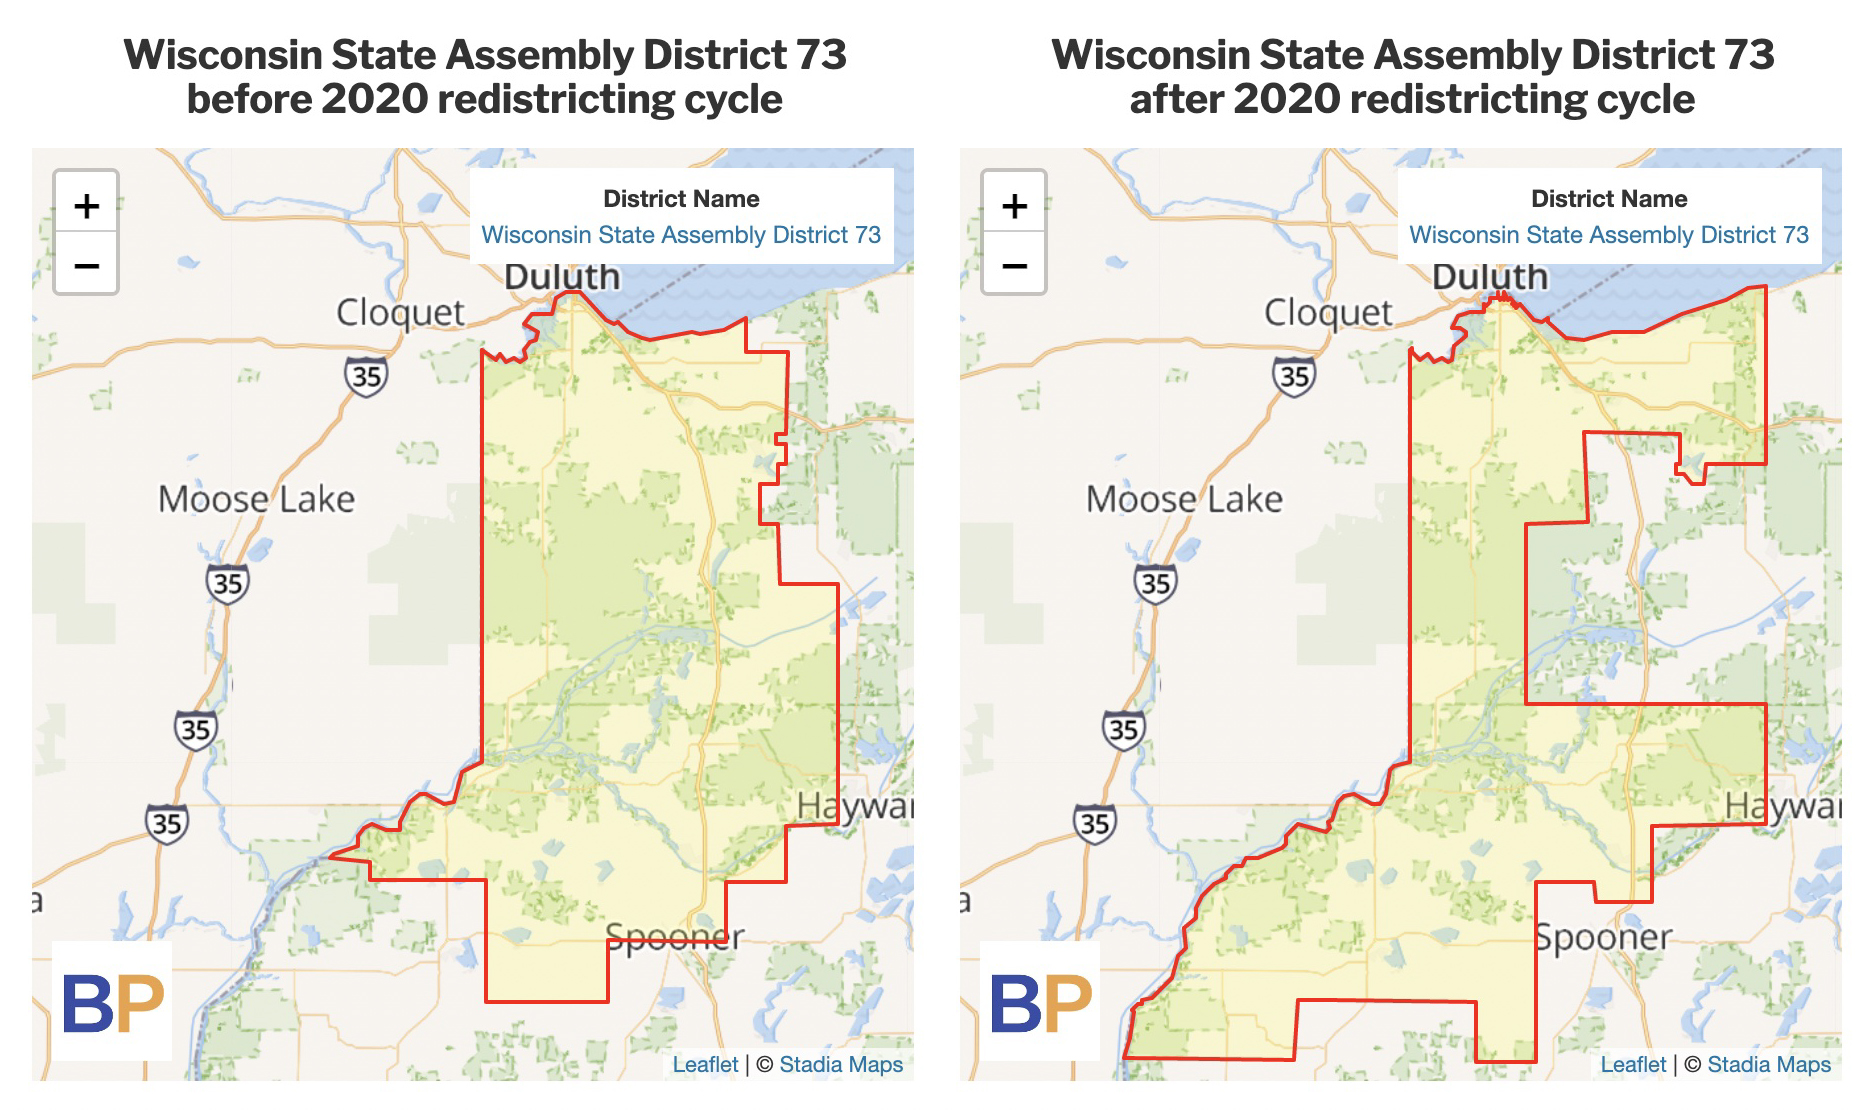 73rd Assembly District boundaries before and after redistricting